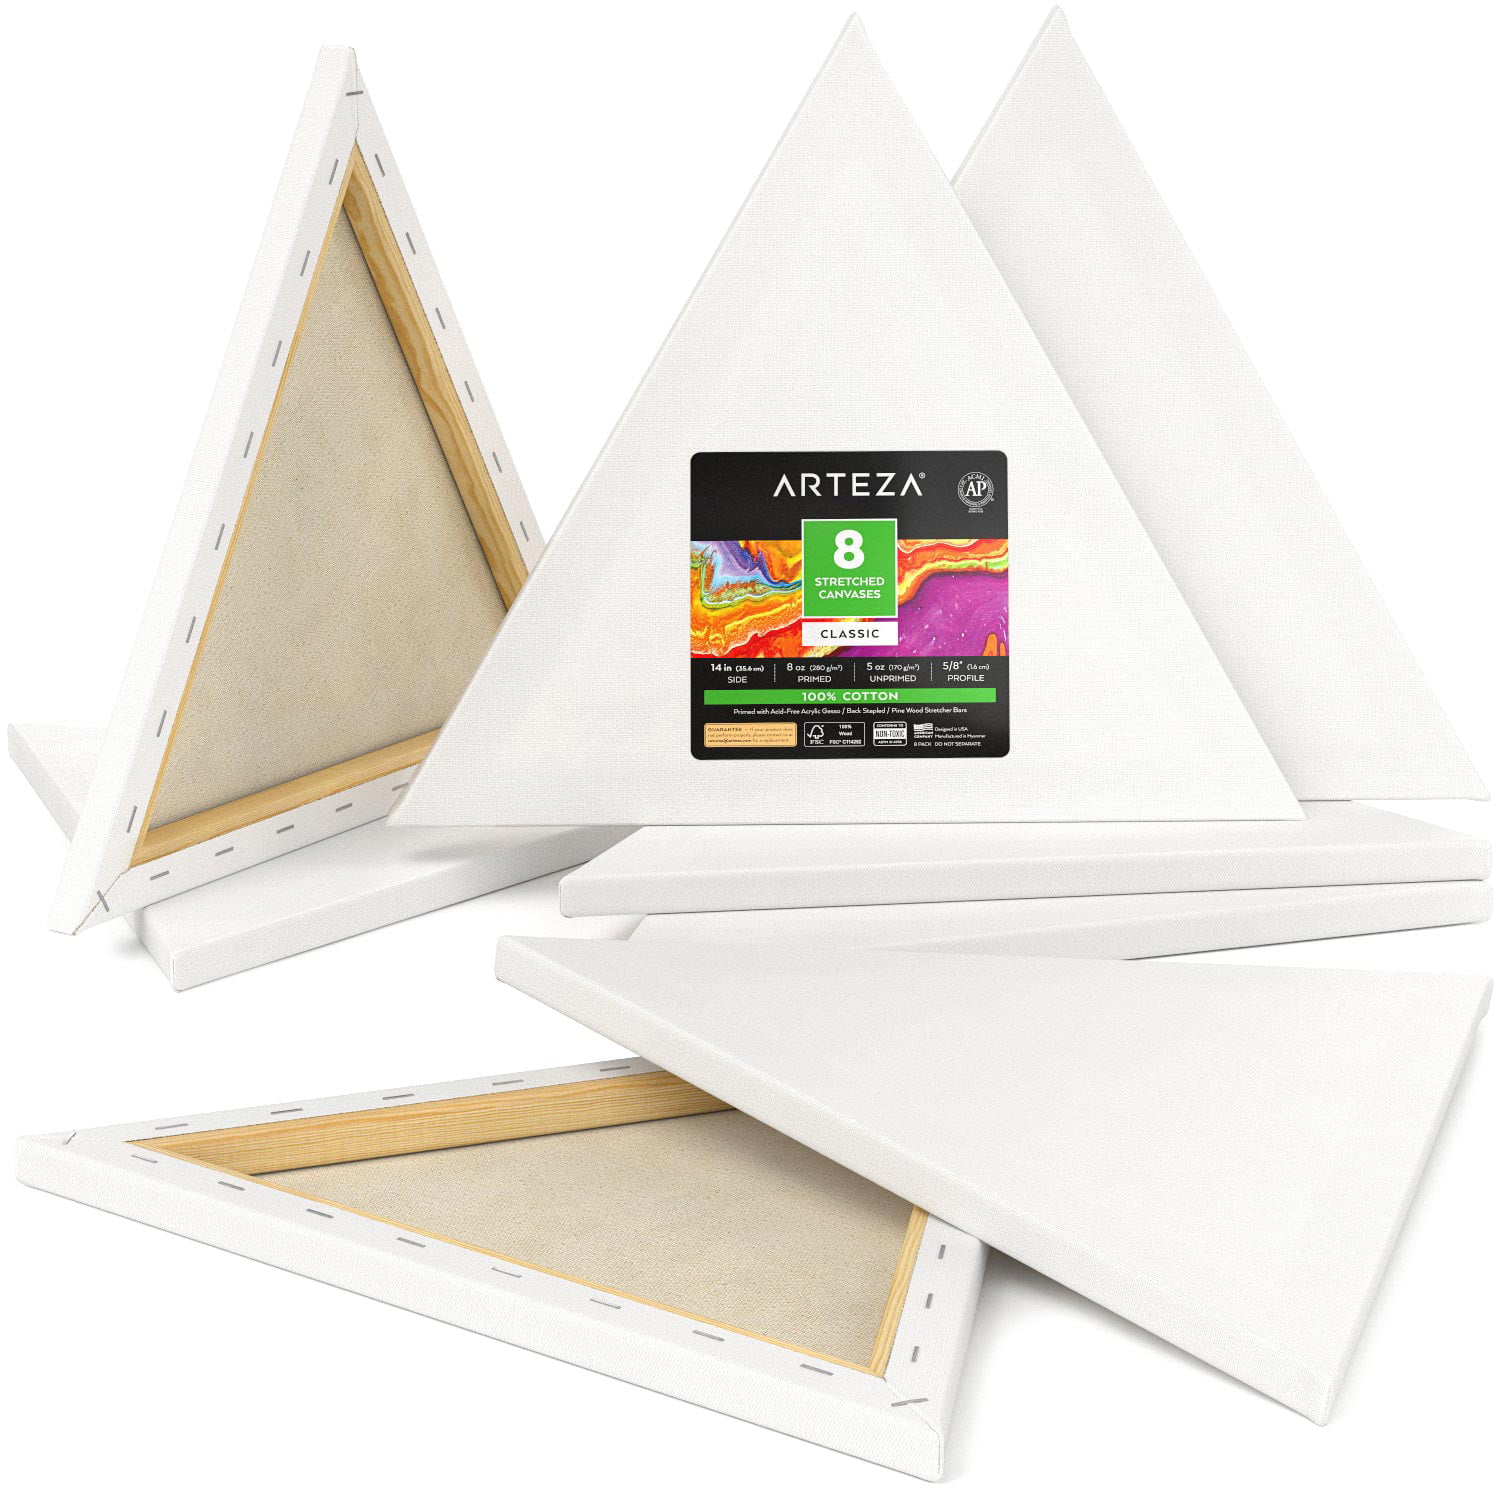 Stretched Canvases for Painting 8x8 Inch 7-Pack, 10 oz Triple Primed  Acid-Free 100% Cotton Blank Canvas, Square Canvas for Oil Paint Acrylics  Pouring